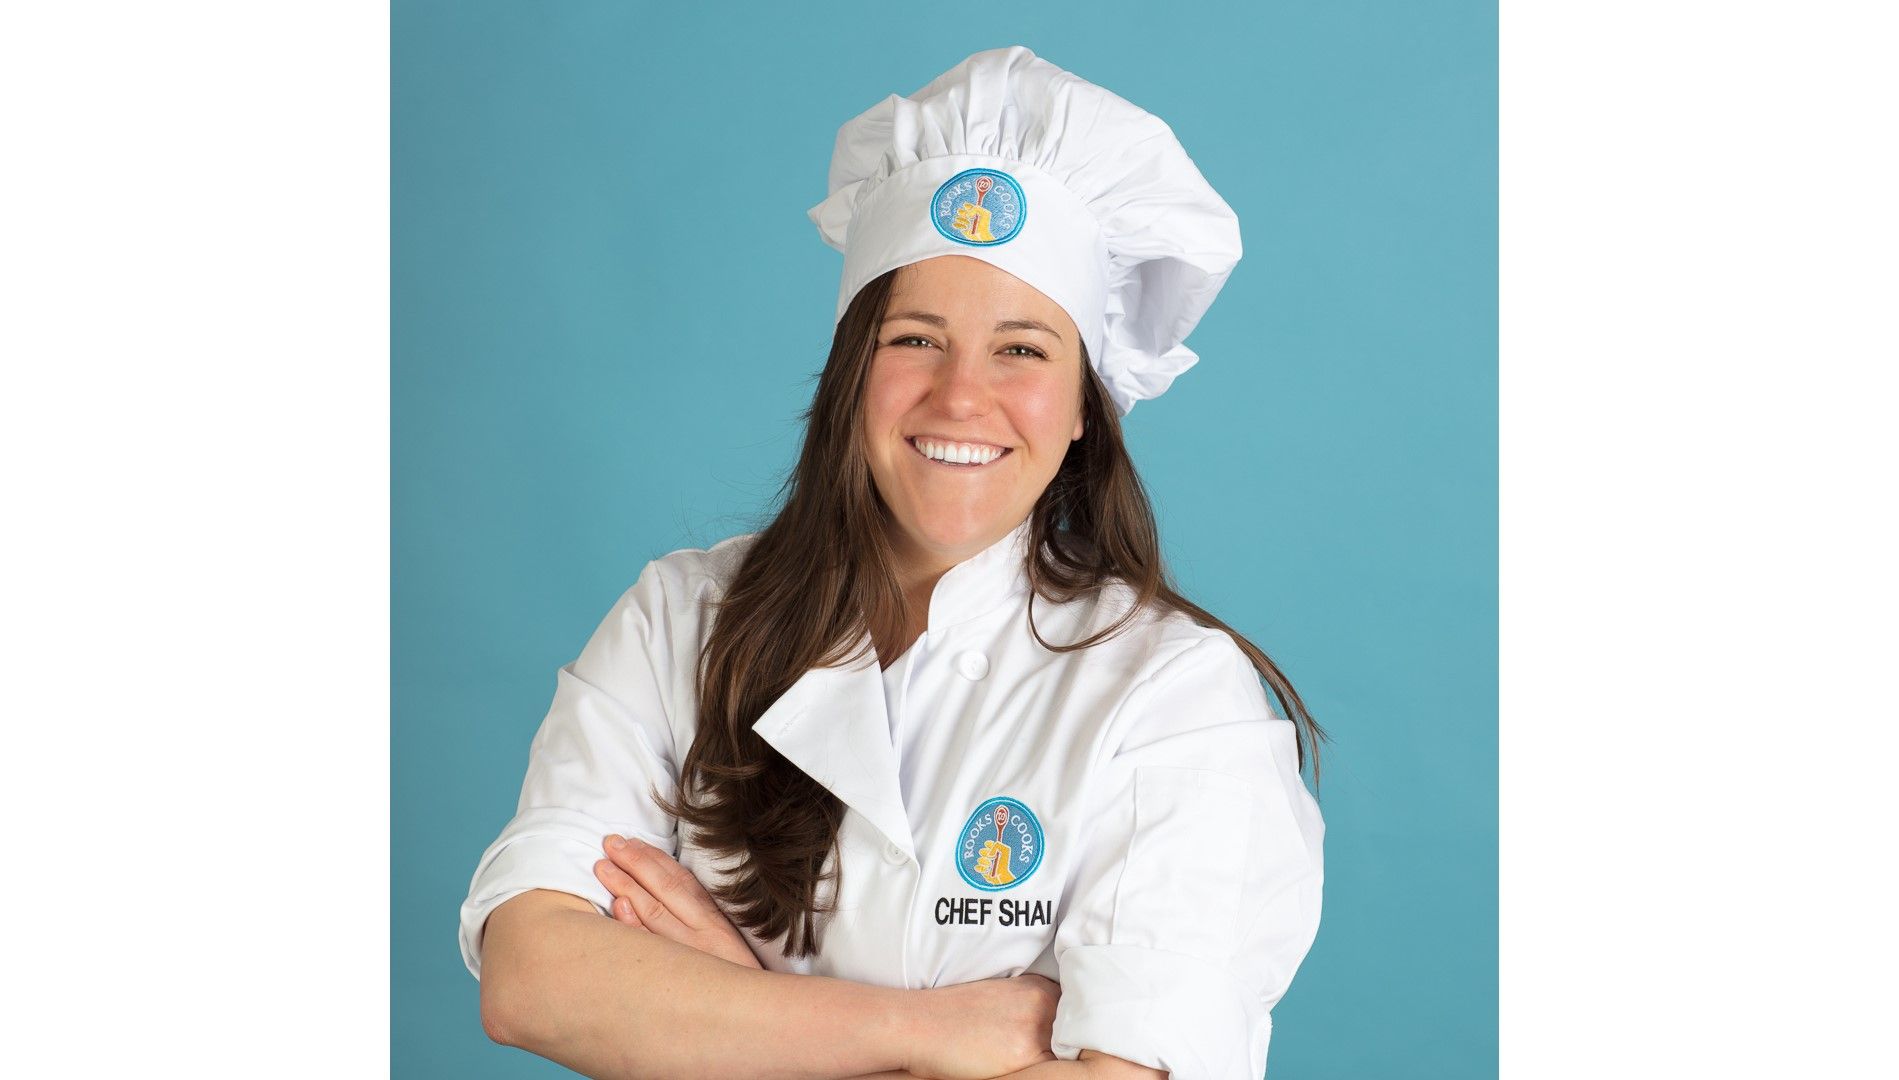 Cooking Classes and Camps for Children! - Rooks to Cooks